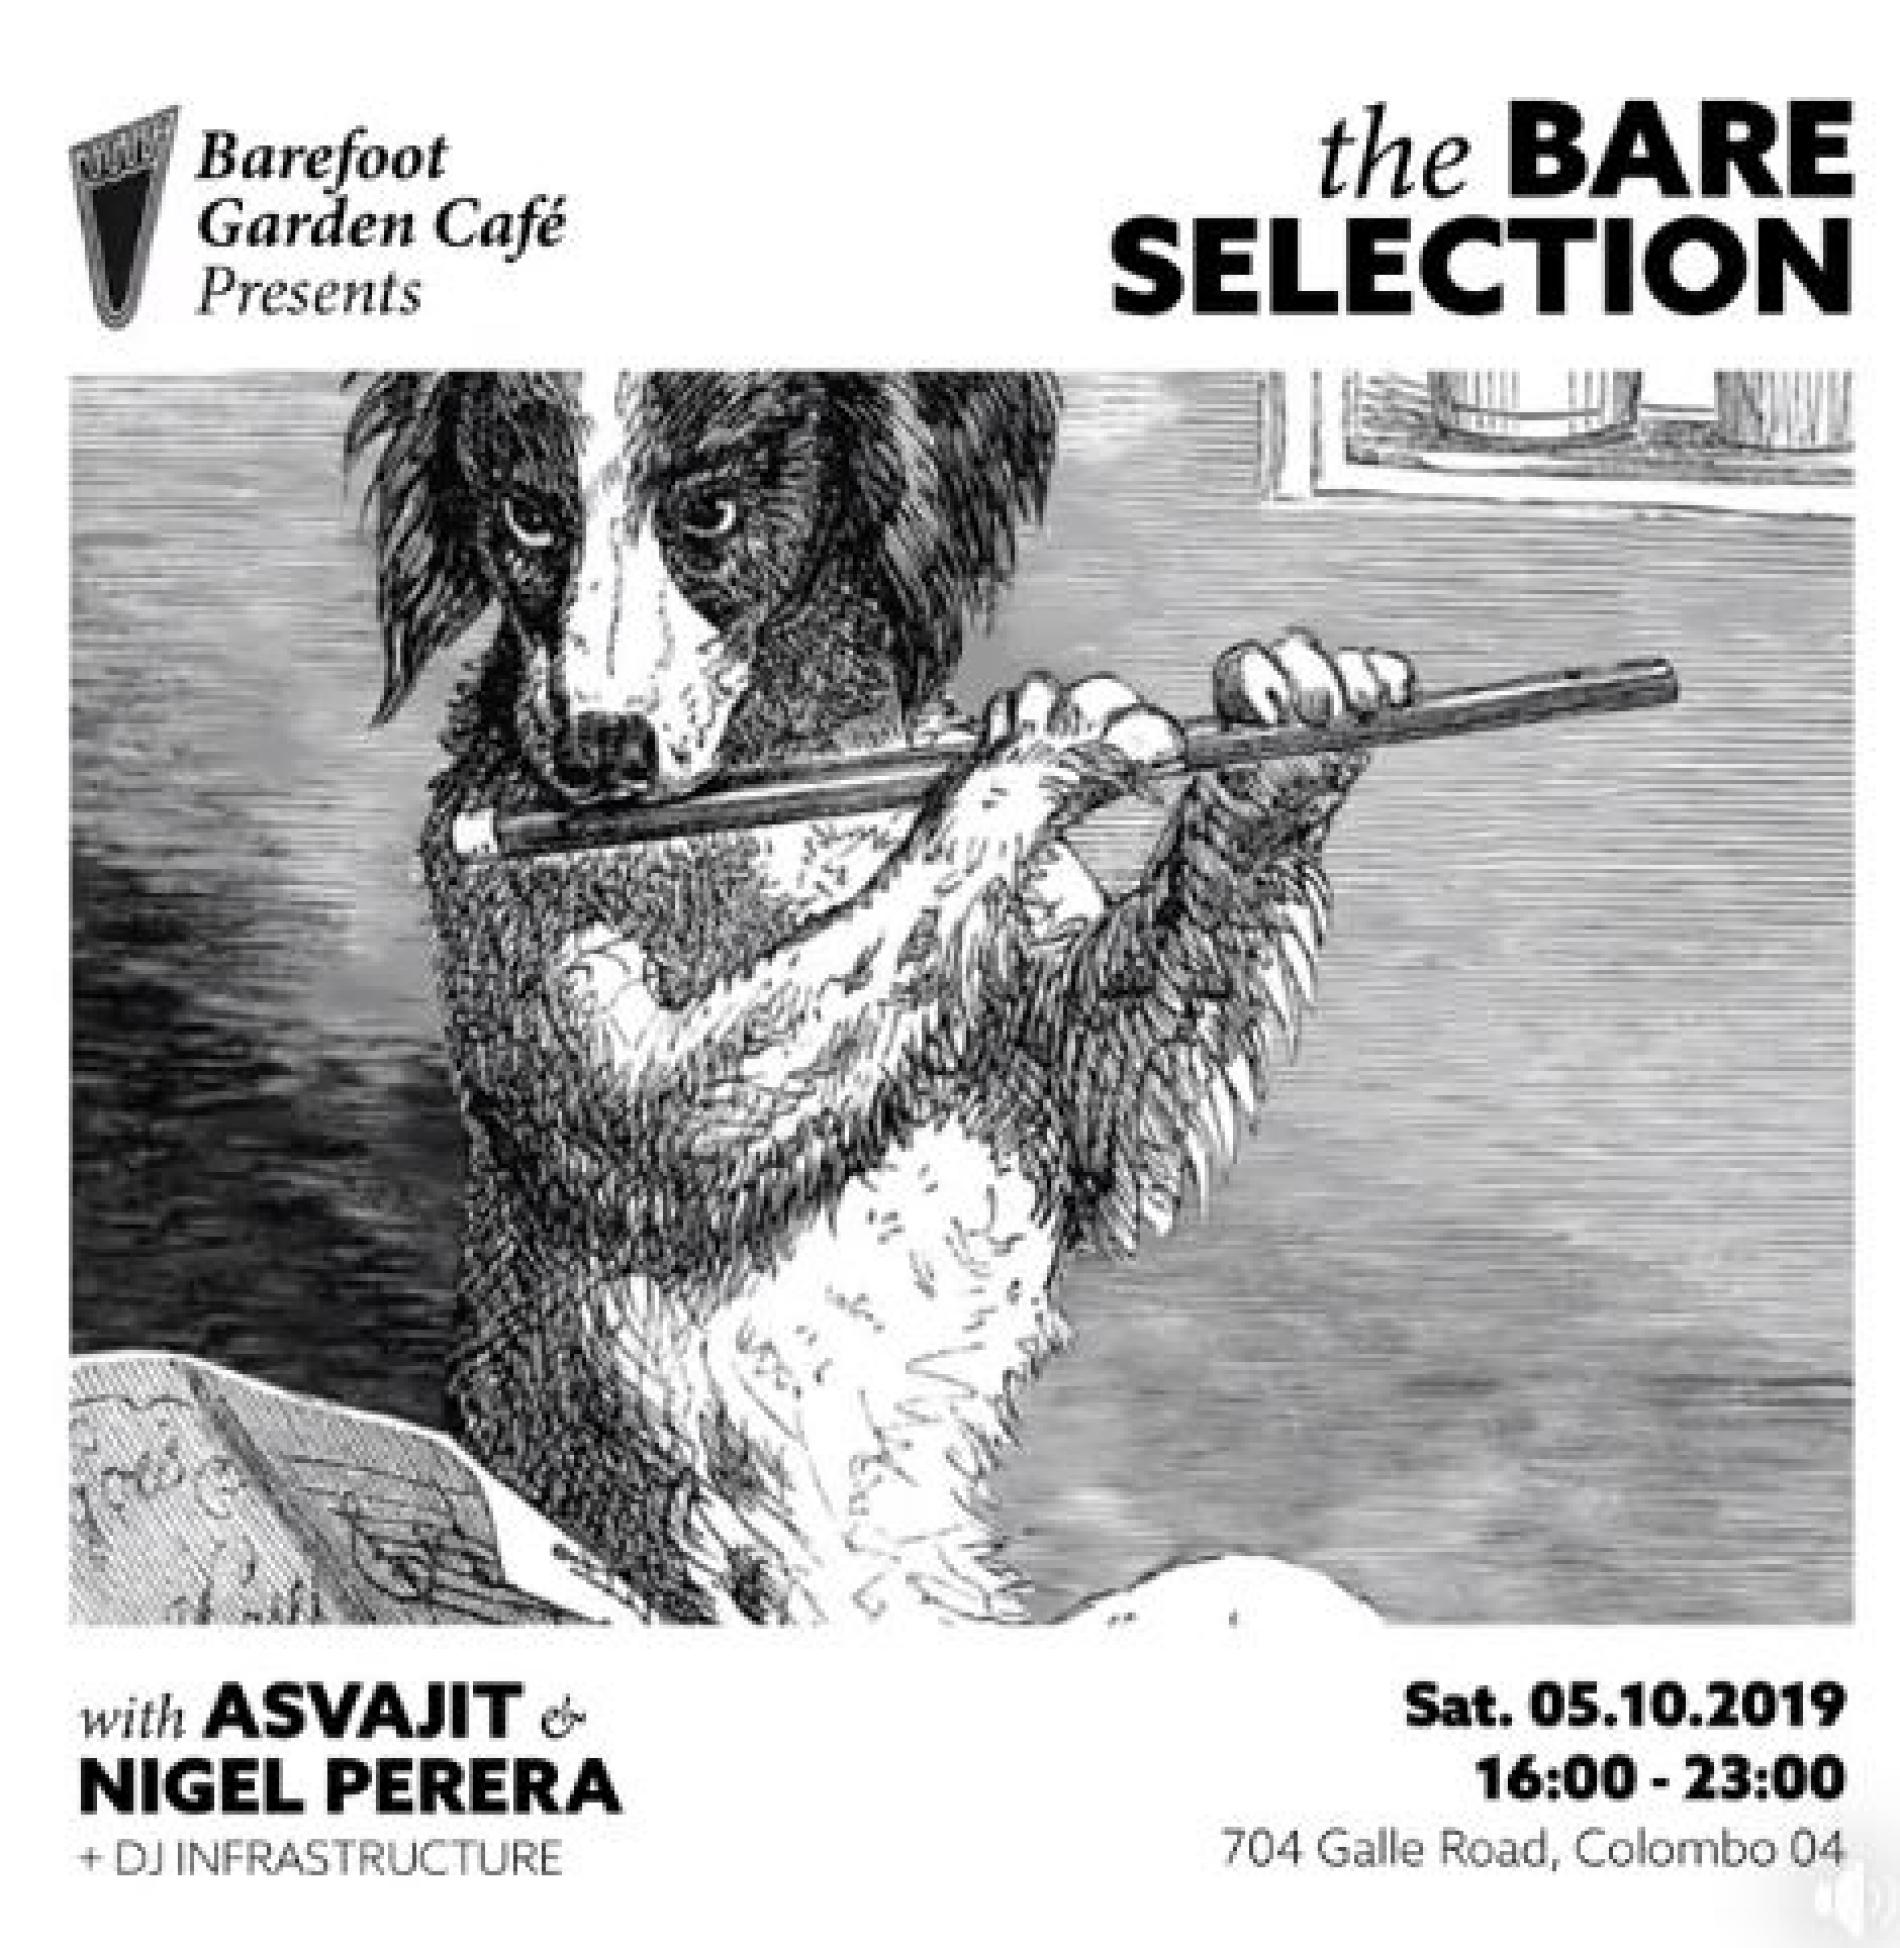 The Bare Selection Vol.I